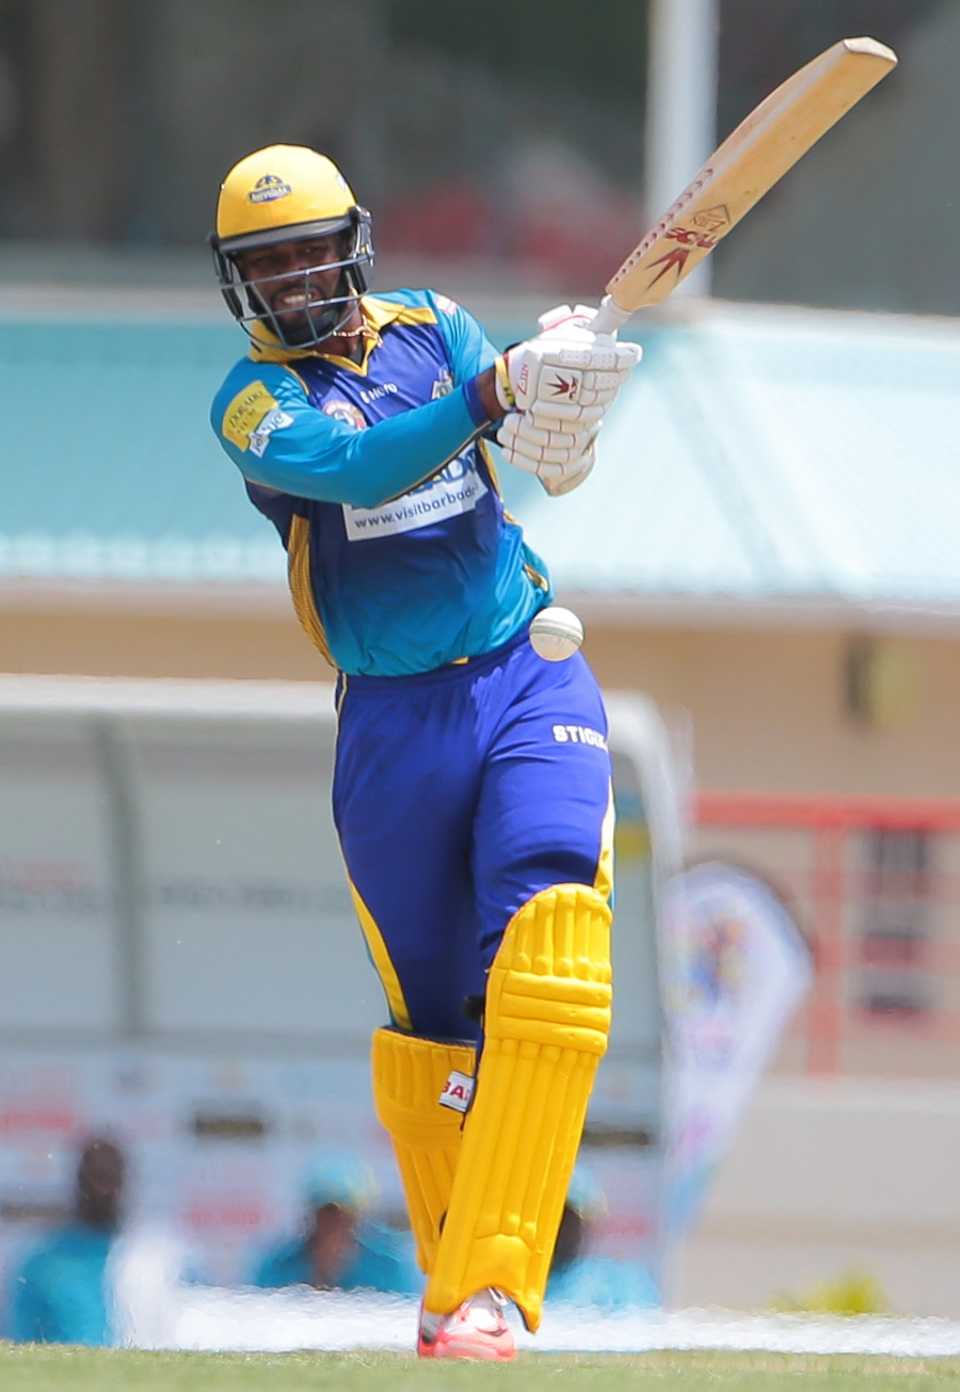 Kyle Hope hit his maiden T20 fifty, St Lucia Zouks v Barbados Tridents, CPL 2016, Gros Islet, July 23, 2016